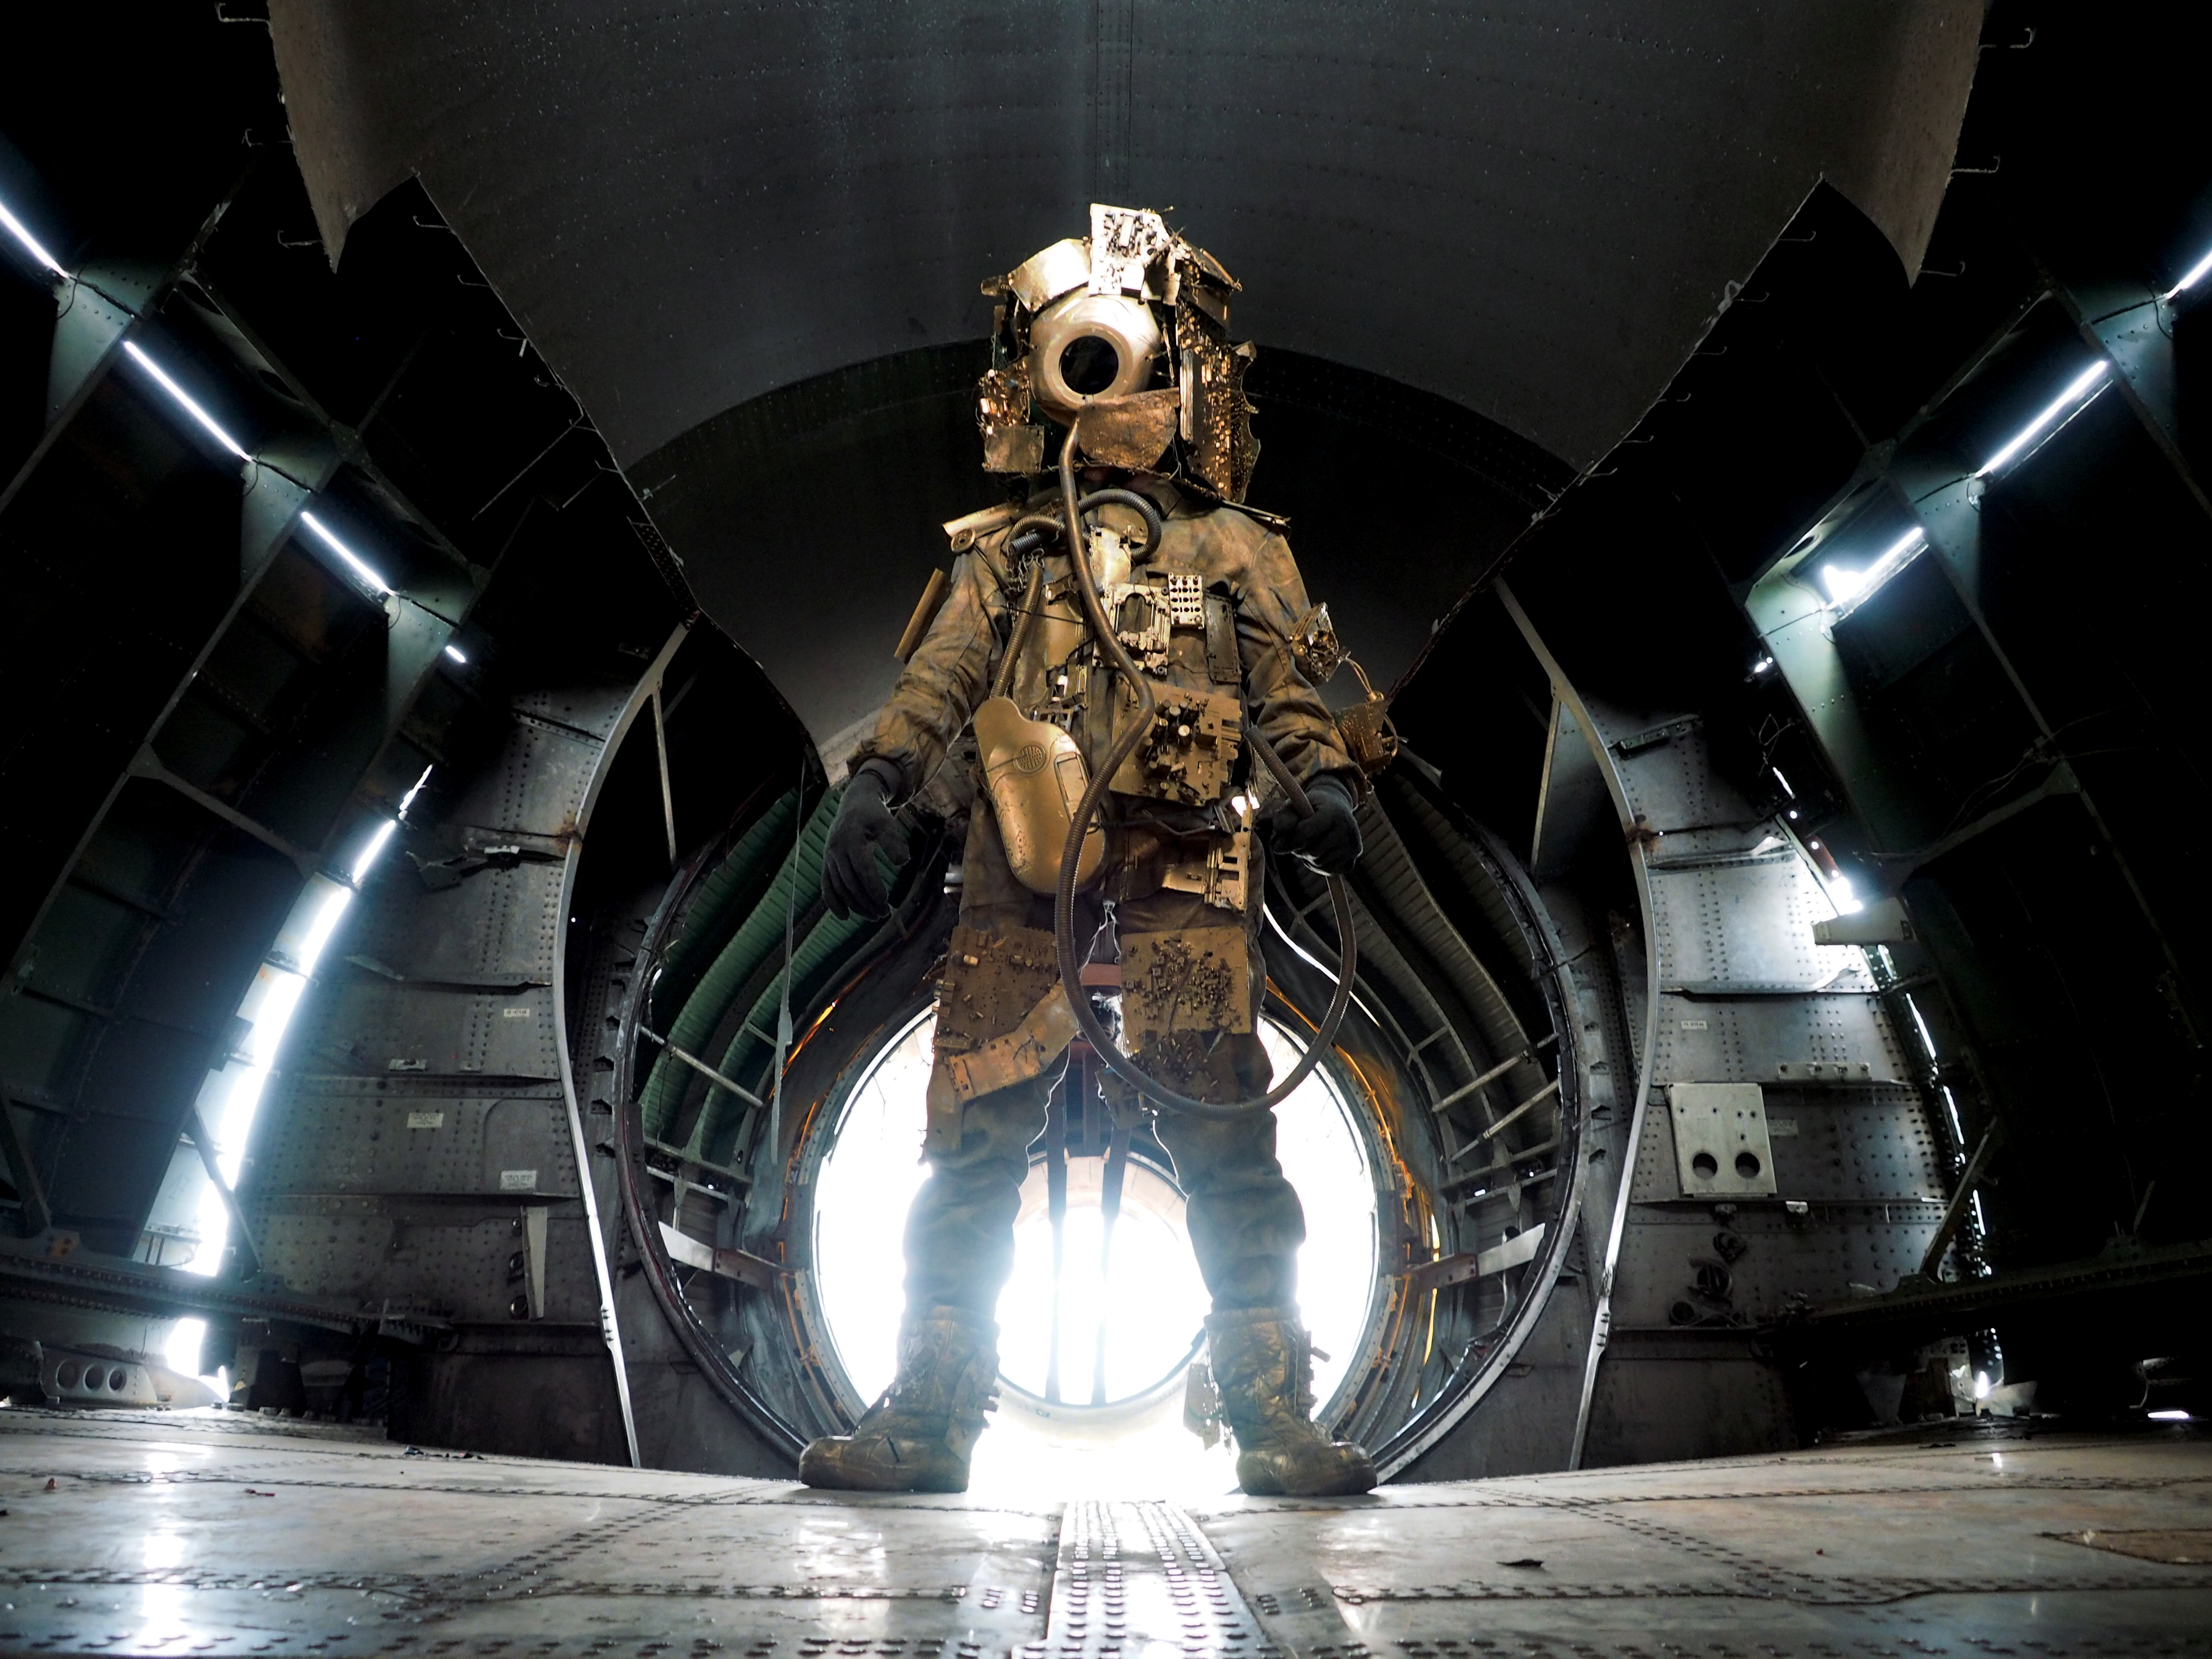 Photo of a humanoid figure dressed in a gold metallic makeshift space suit and helmet standing in the body of a gutted airplane showing the metal bracing and studs with a circle of light behind them.